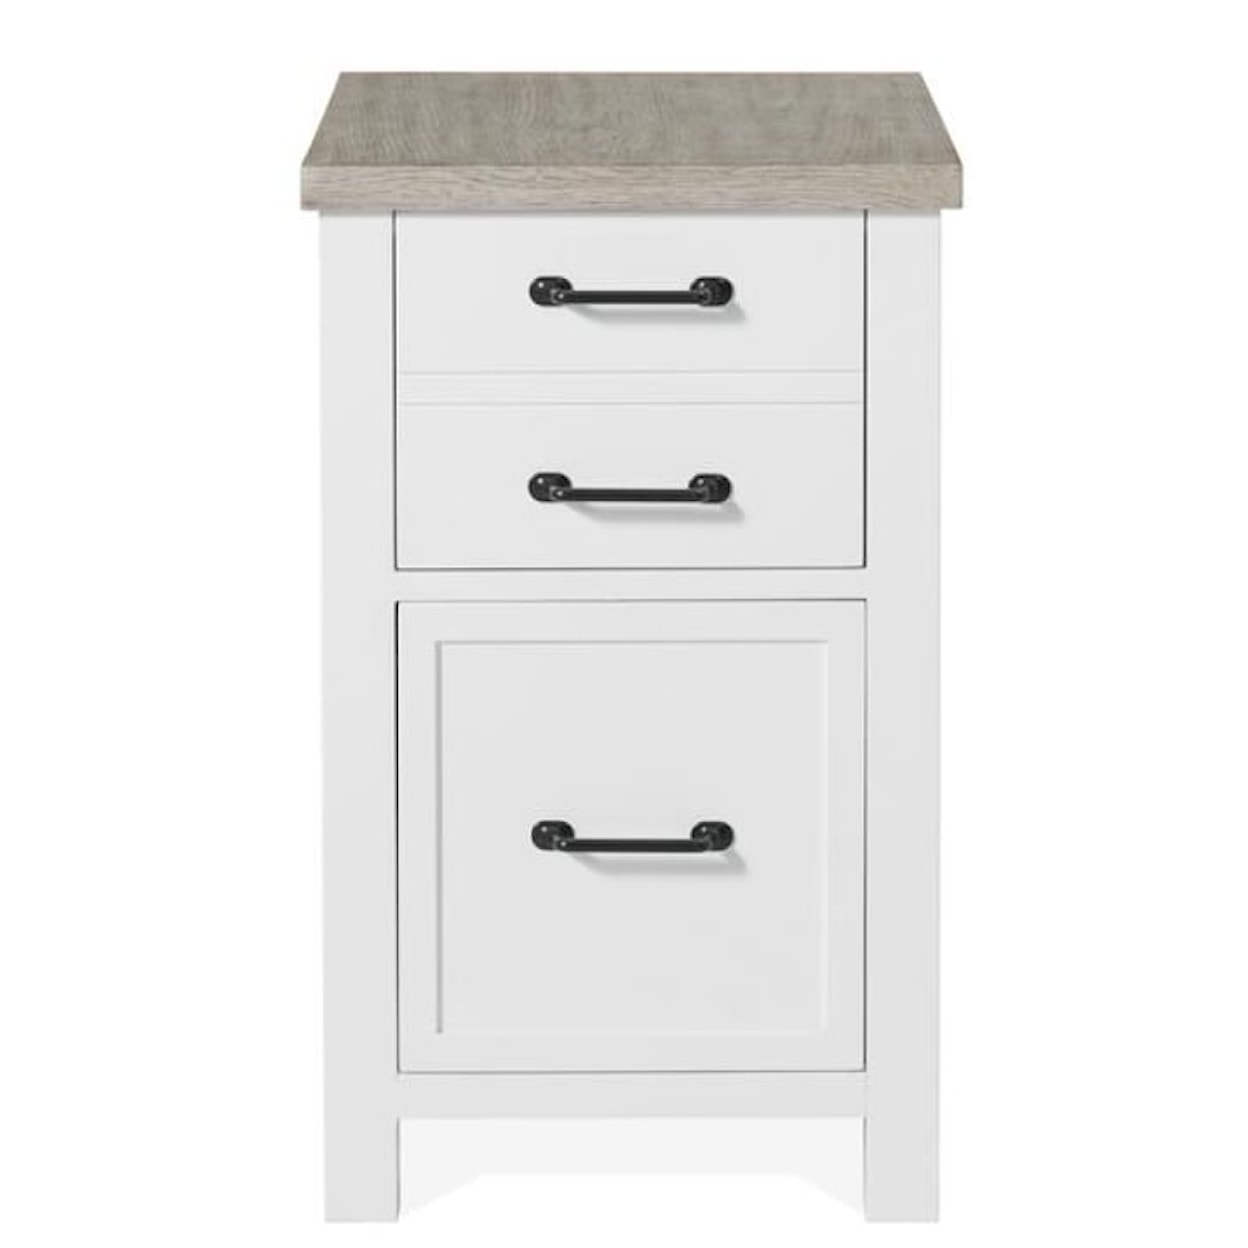 Riverside Furniture Finn Writing Desk with 2 File Cabinets